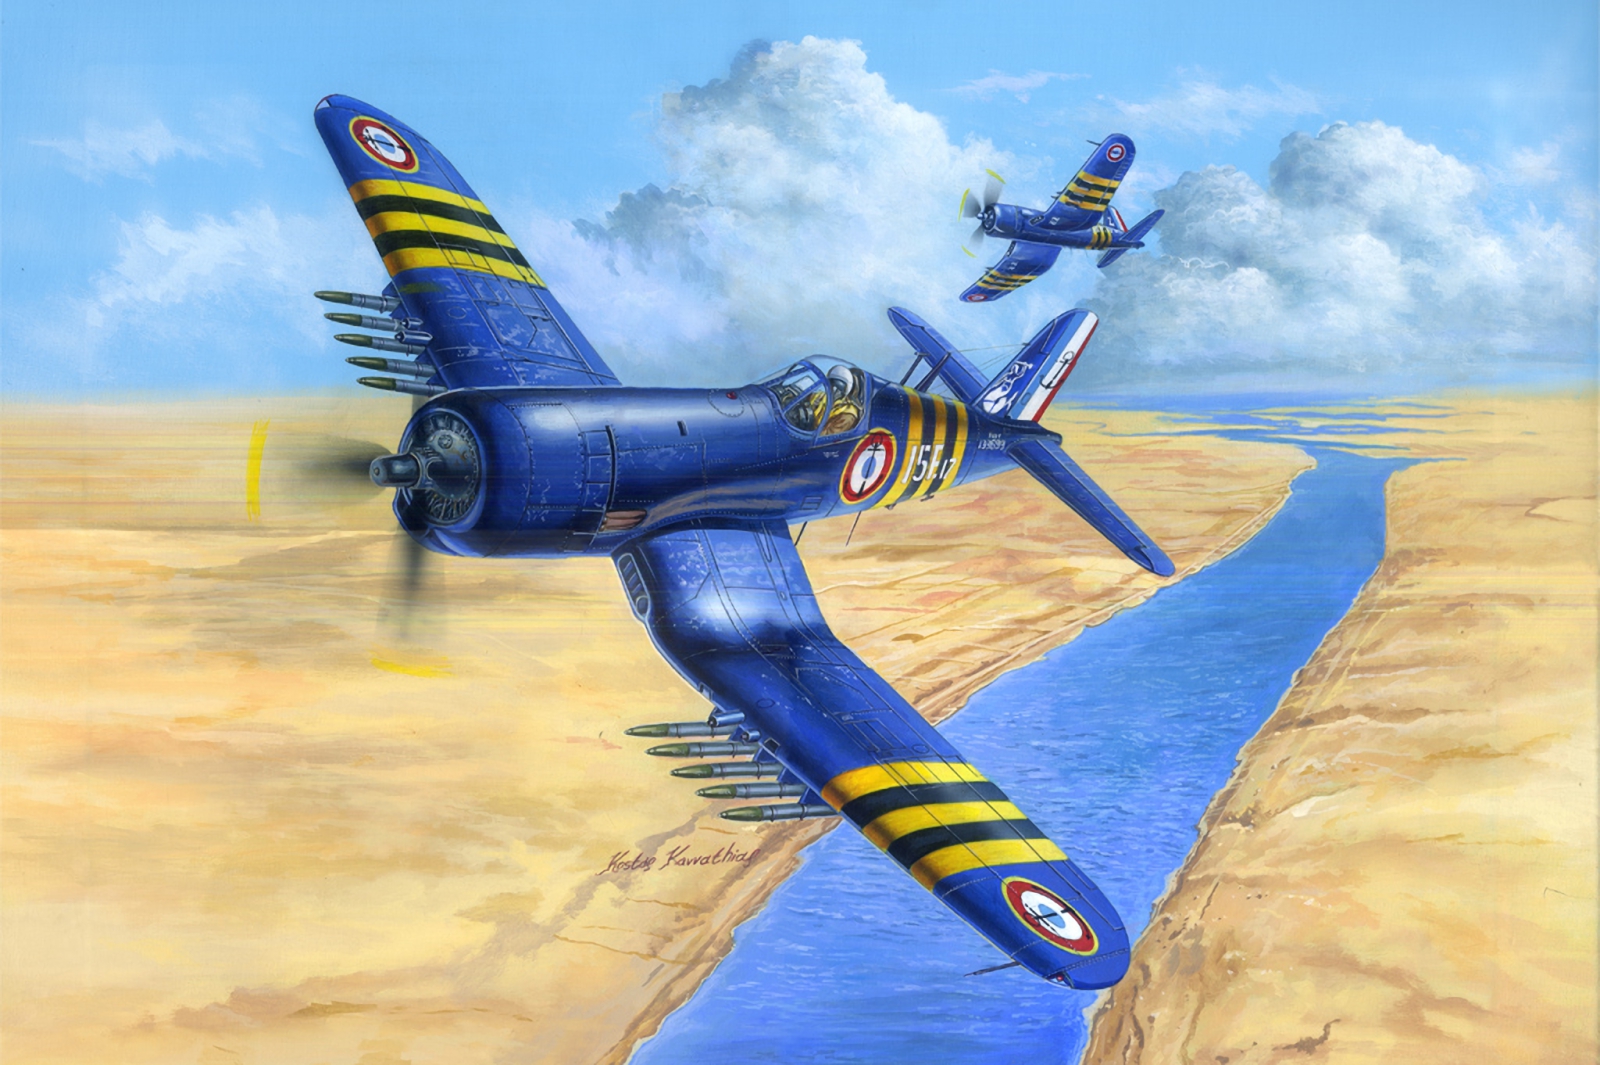 General 1600x1065 aircraft flying sky military military vehicle artwork clouds water pilot men missiles signature Vought F4U Corsair Kostas Kavvathias military aircraft Boxart desert French navy